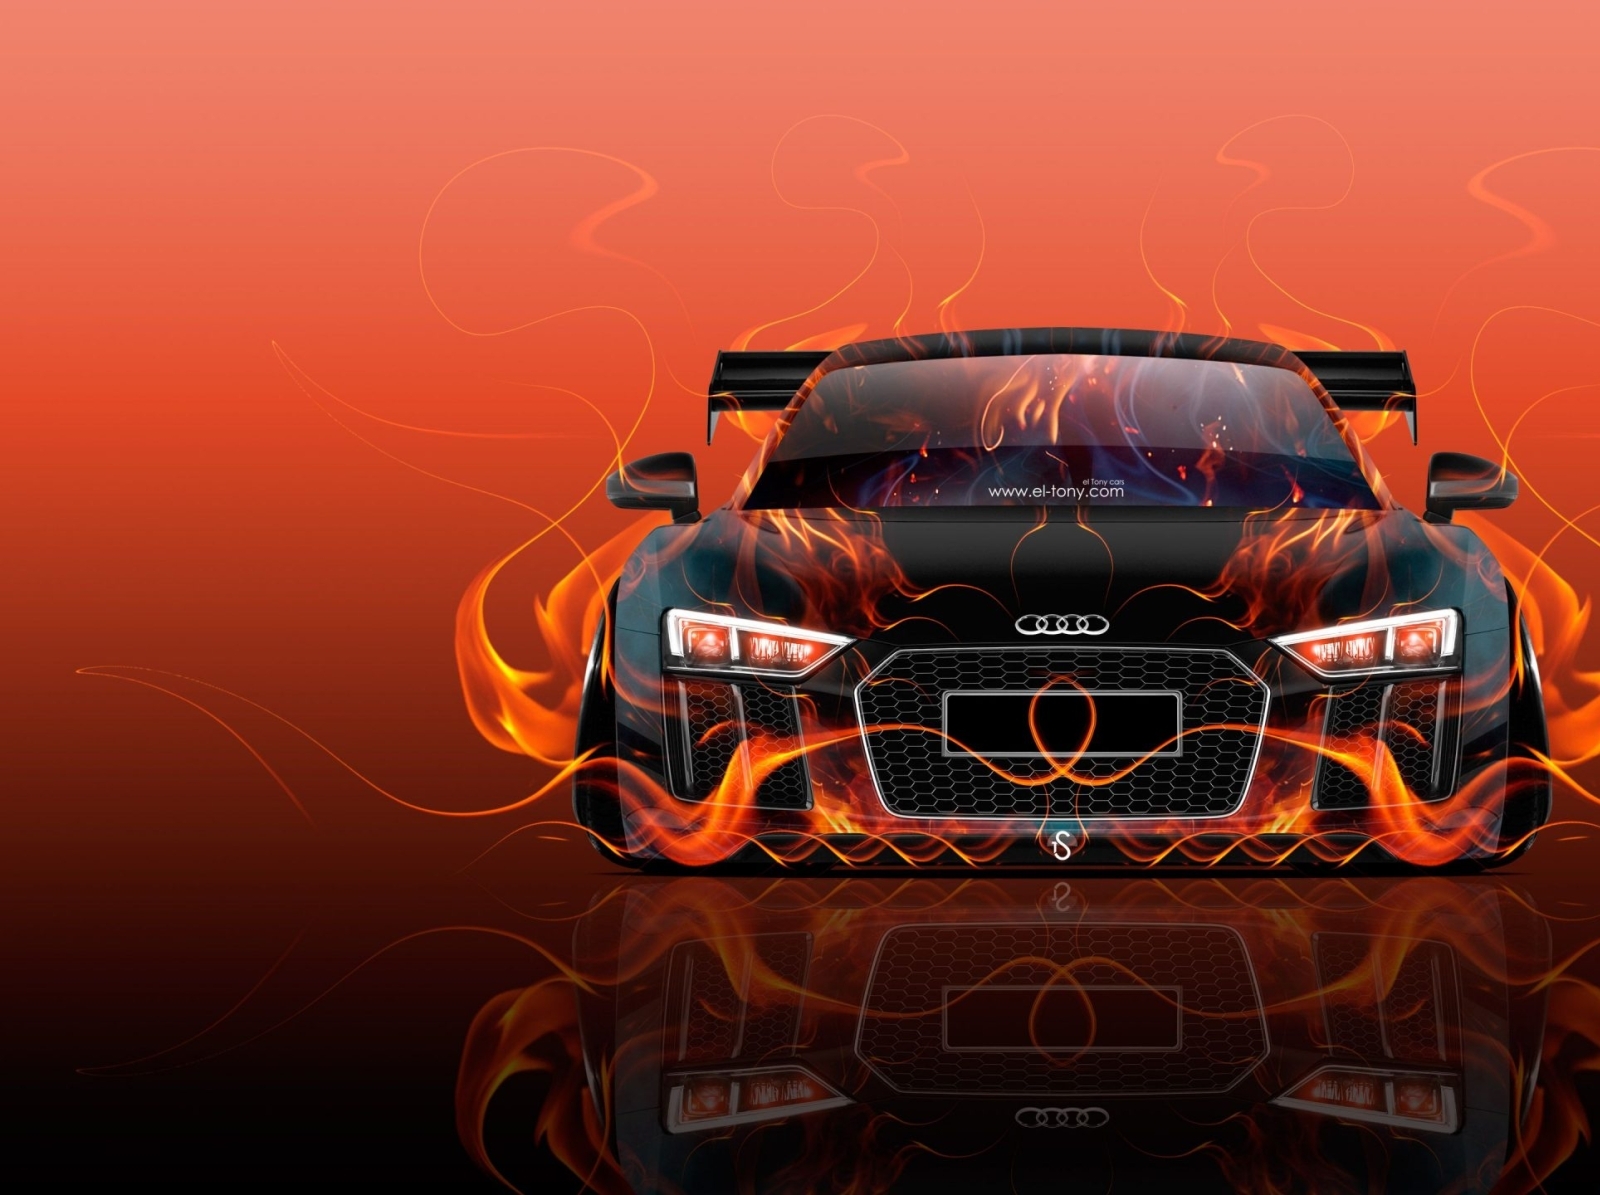 Top 10 Abstract Car Wallpapers by